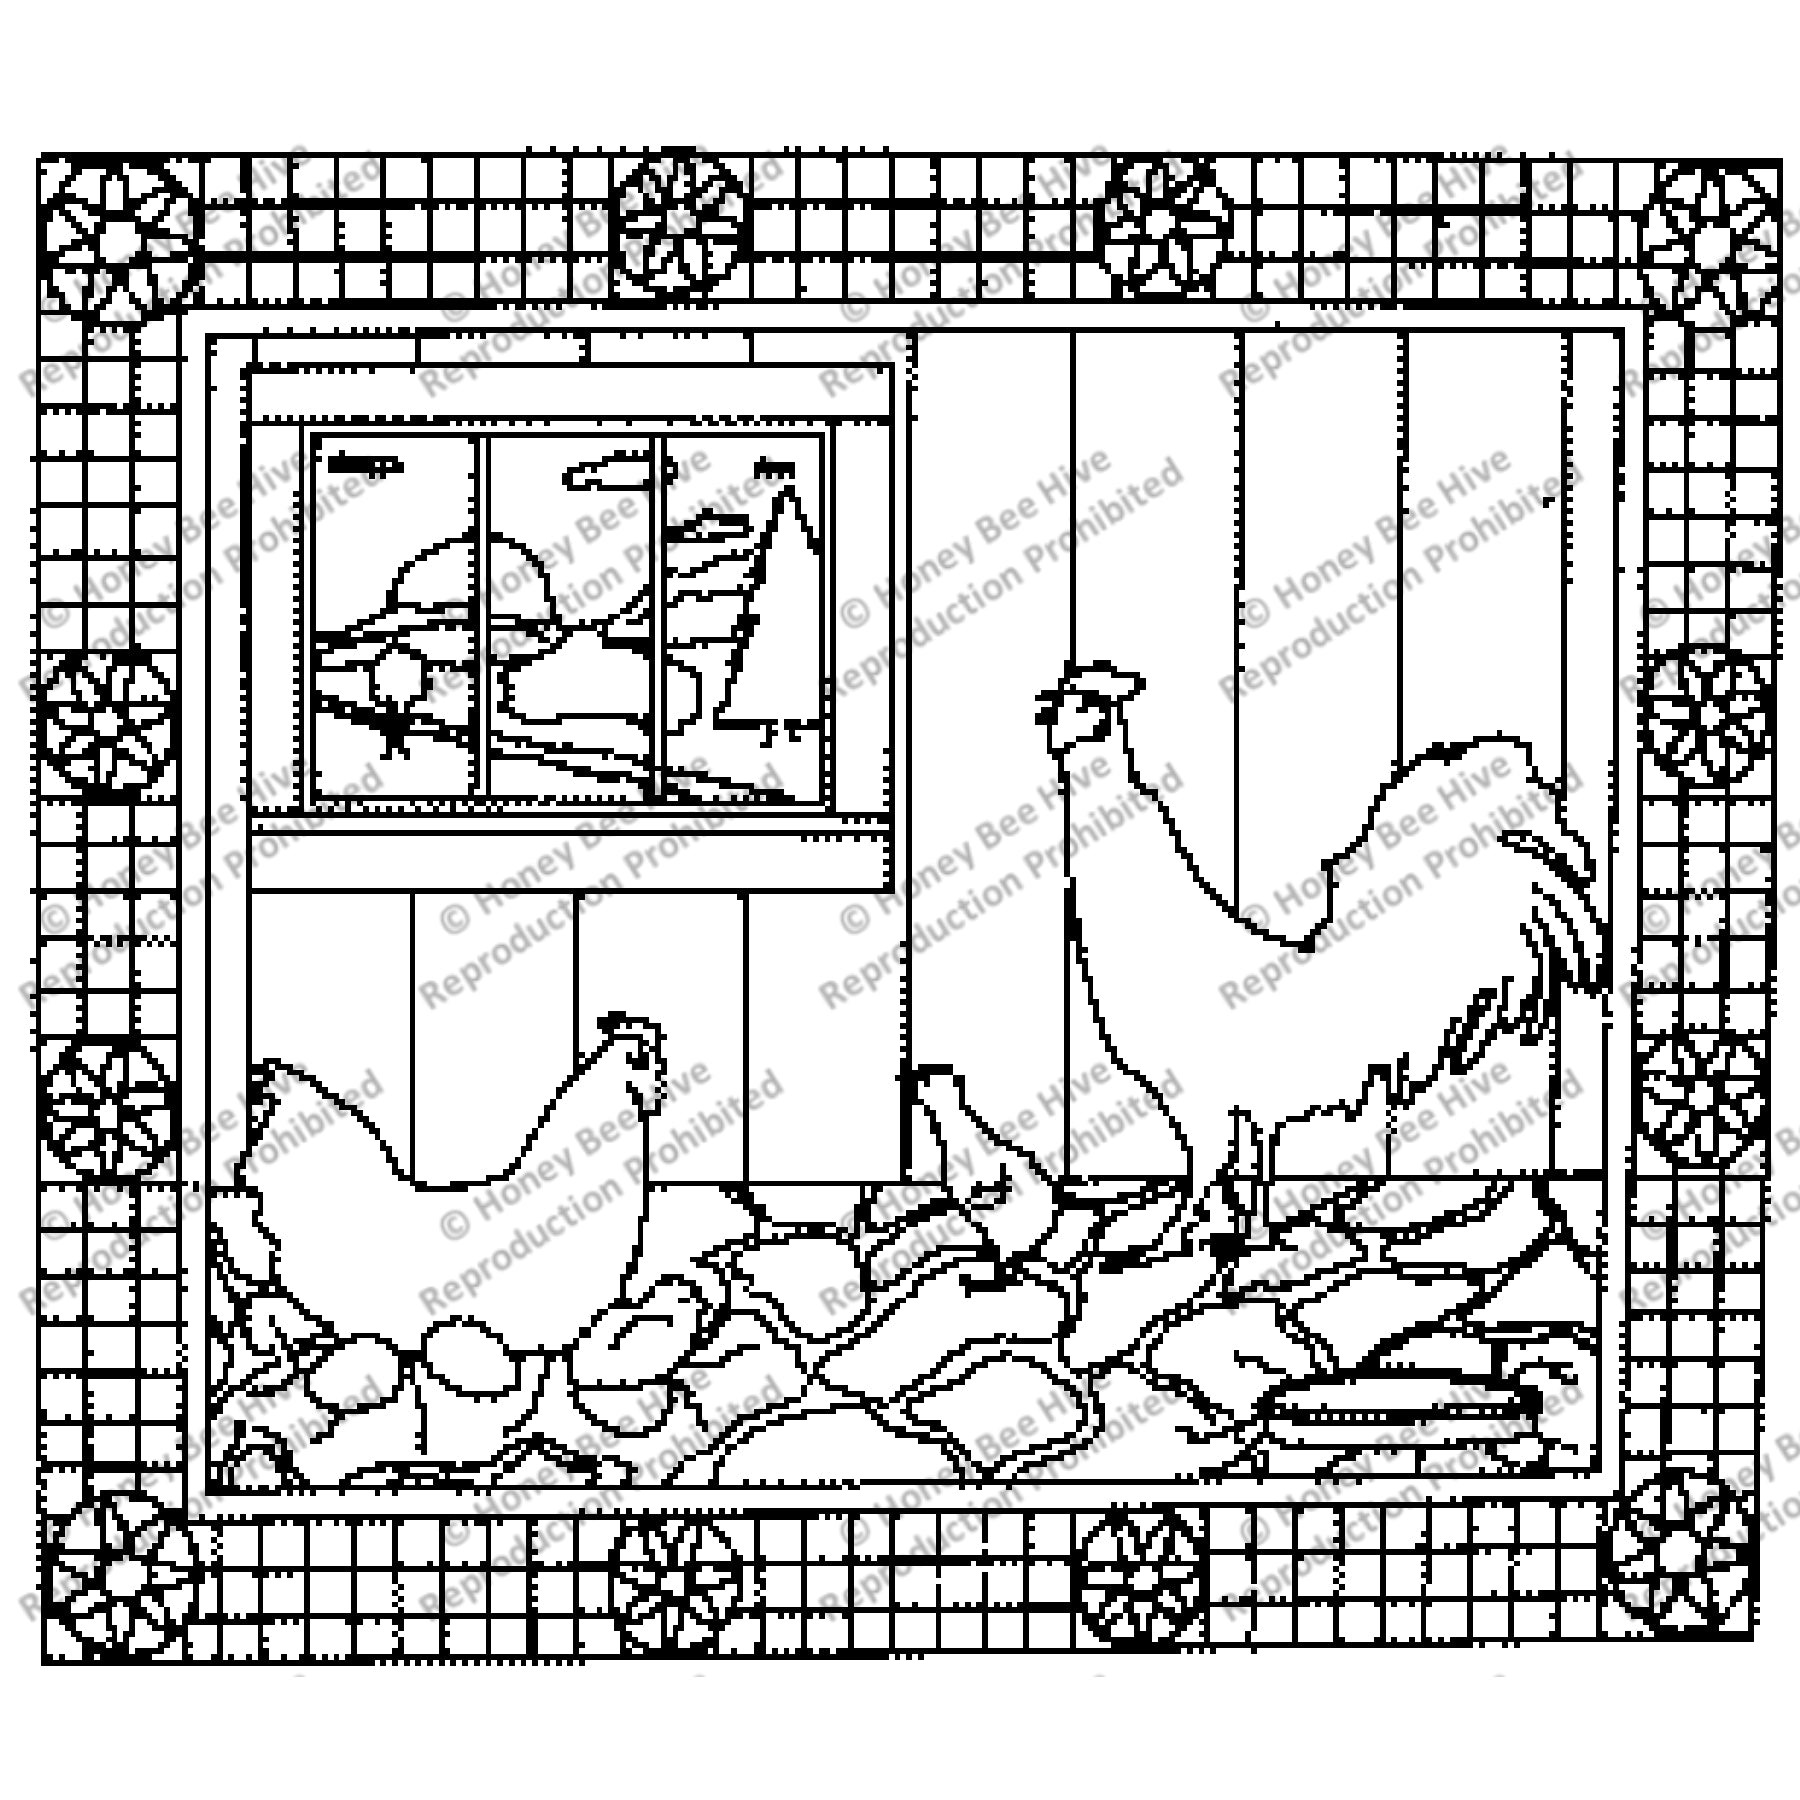 Chicks Acting Up, rug hooking pattern